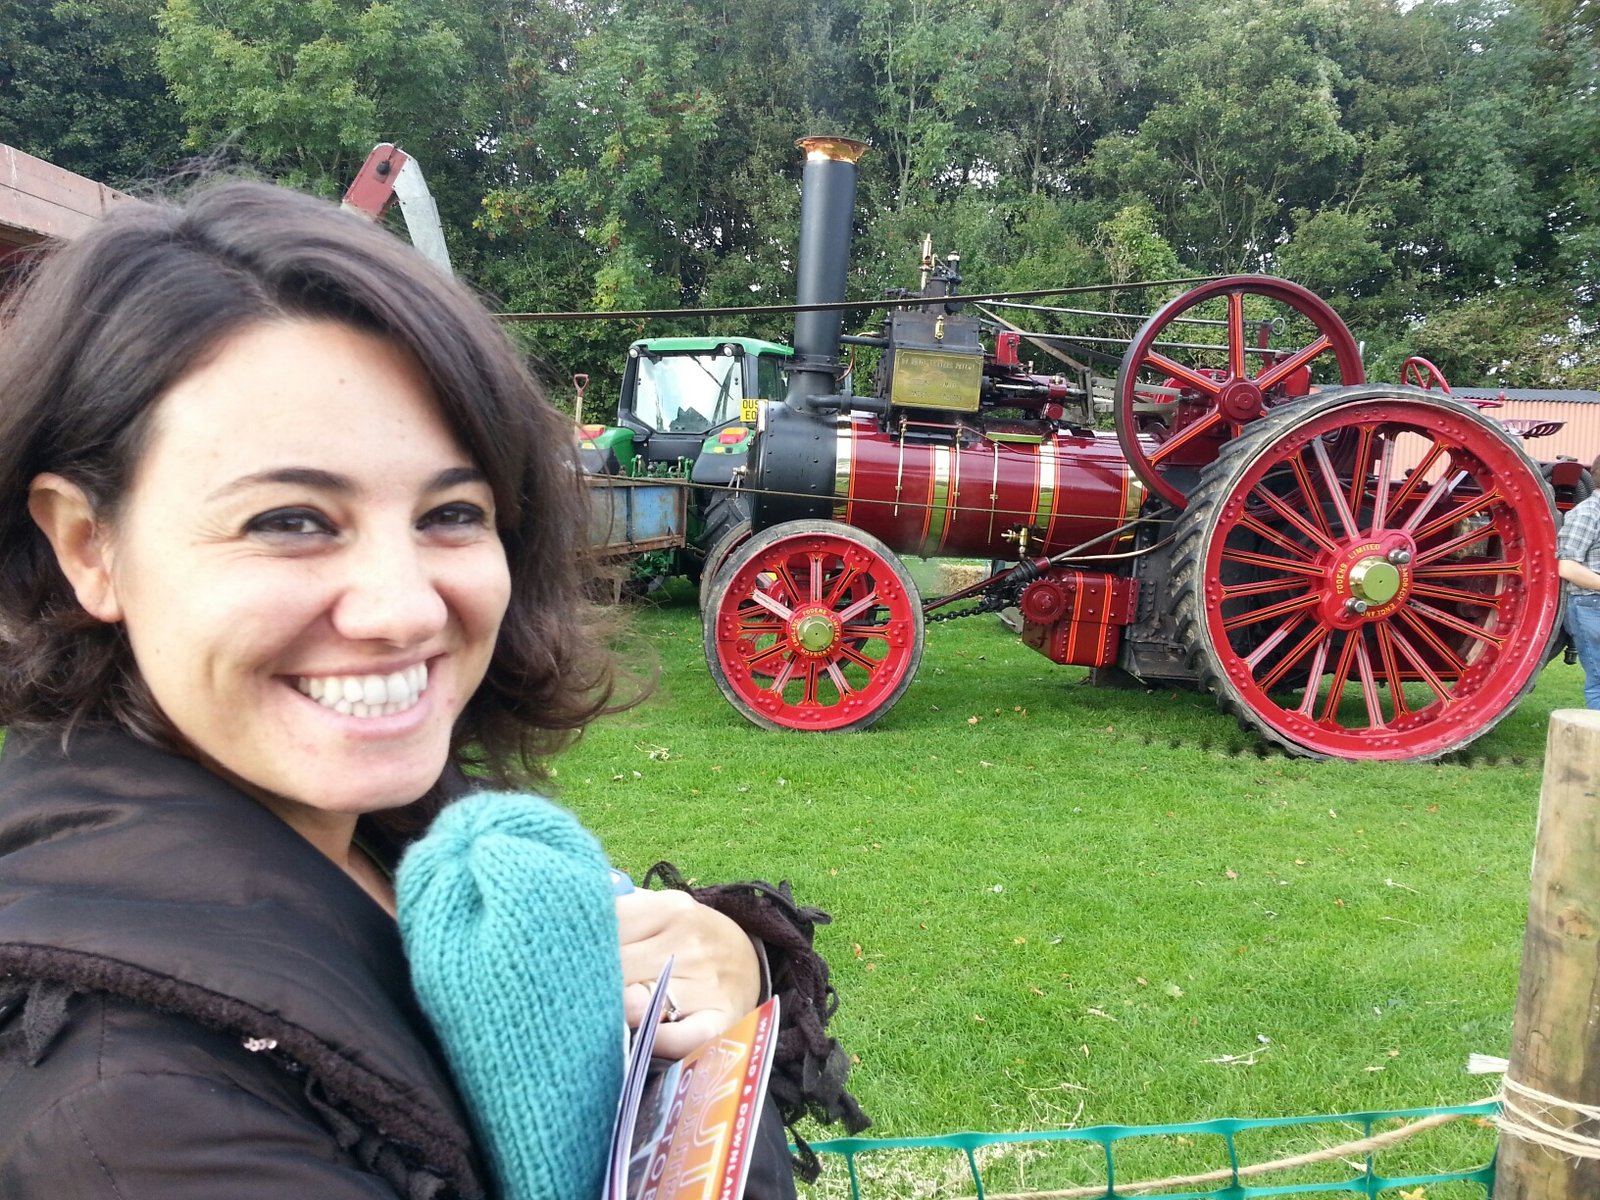 Mariacristina at the Weald & Downland open air museum